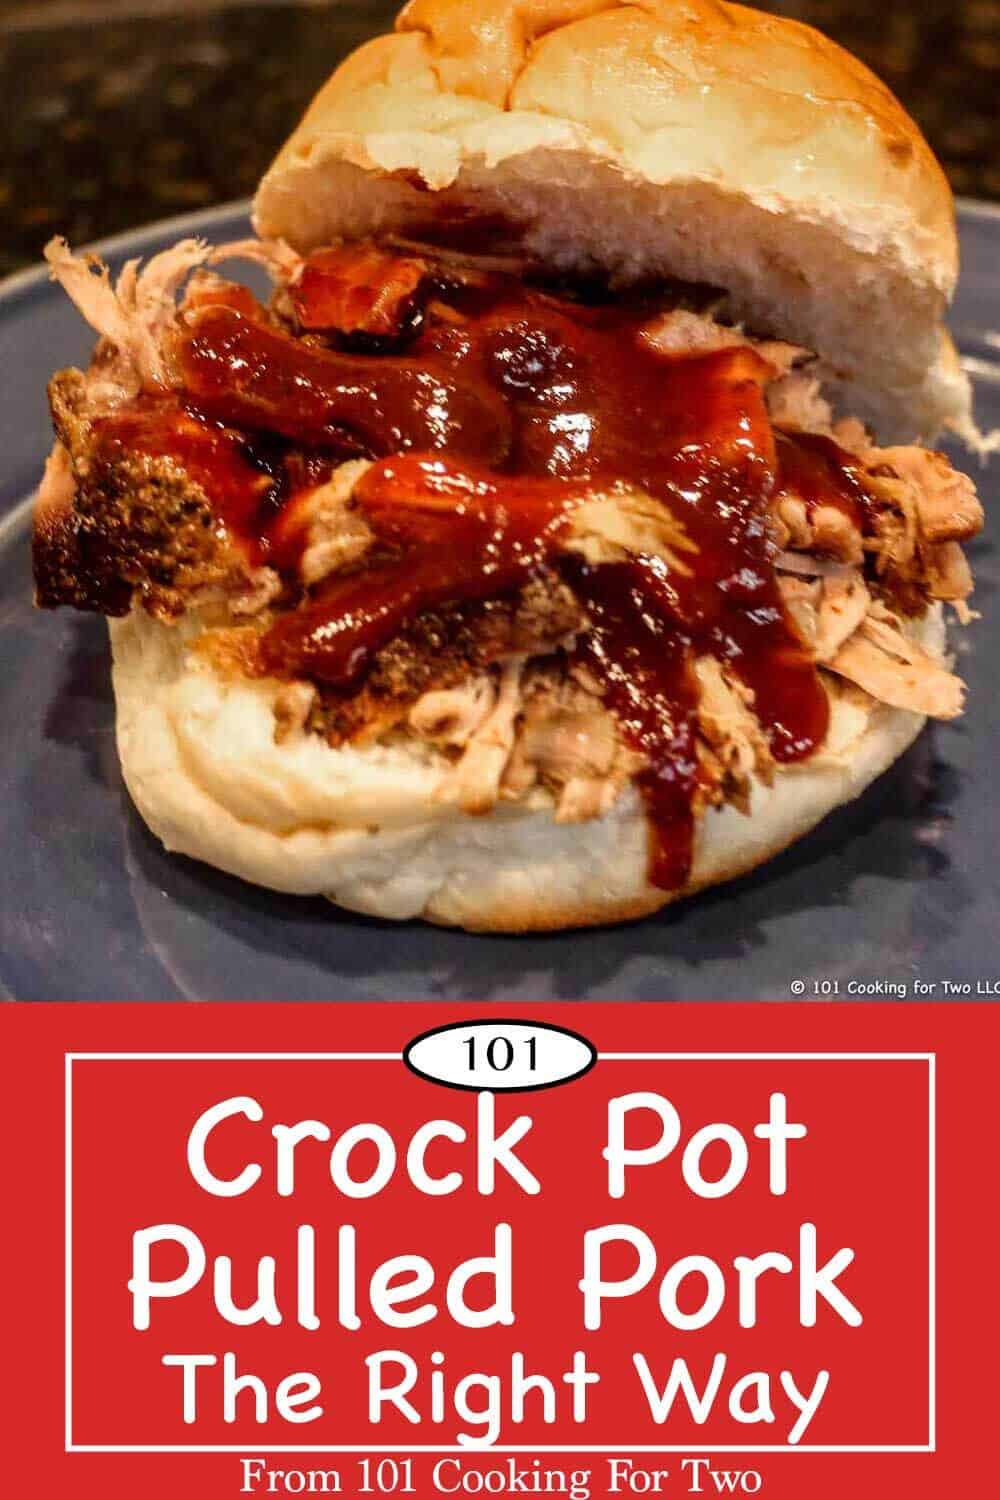 Crock Pot Pulled Pork from Butt the Right Way | 101 Cooking For Two